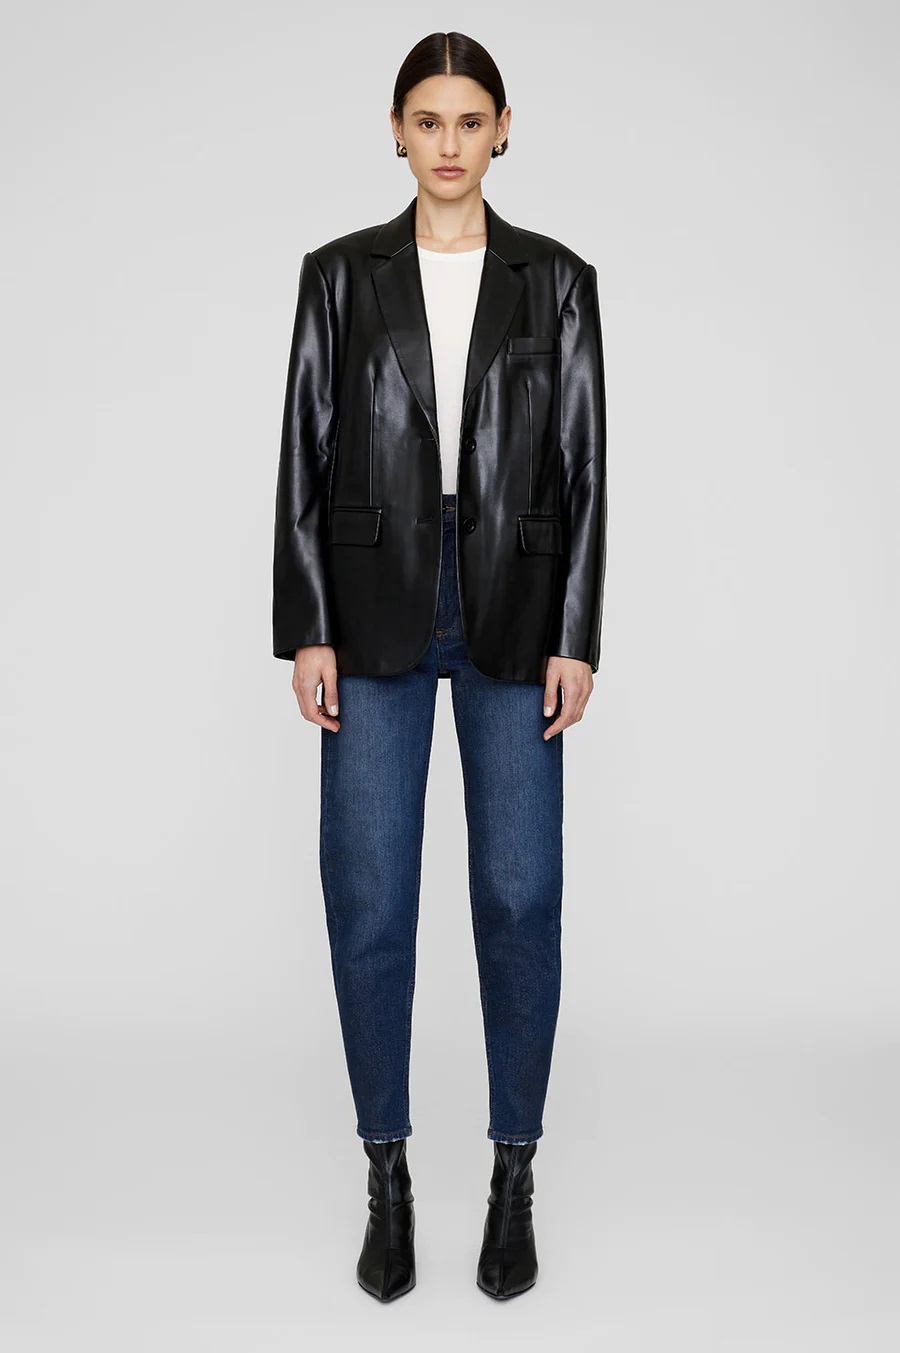 ANINE BING Classic Blazer in Black Recycled Leather